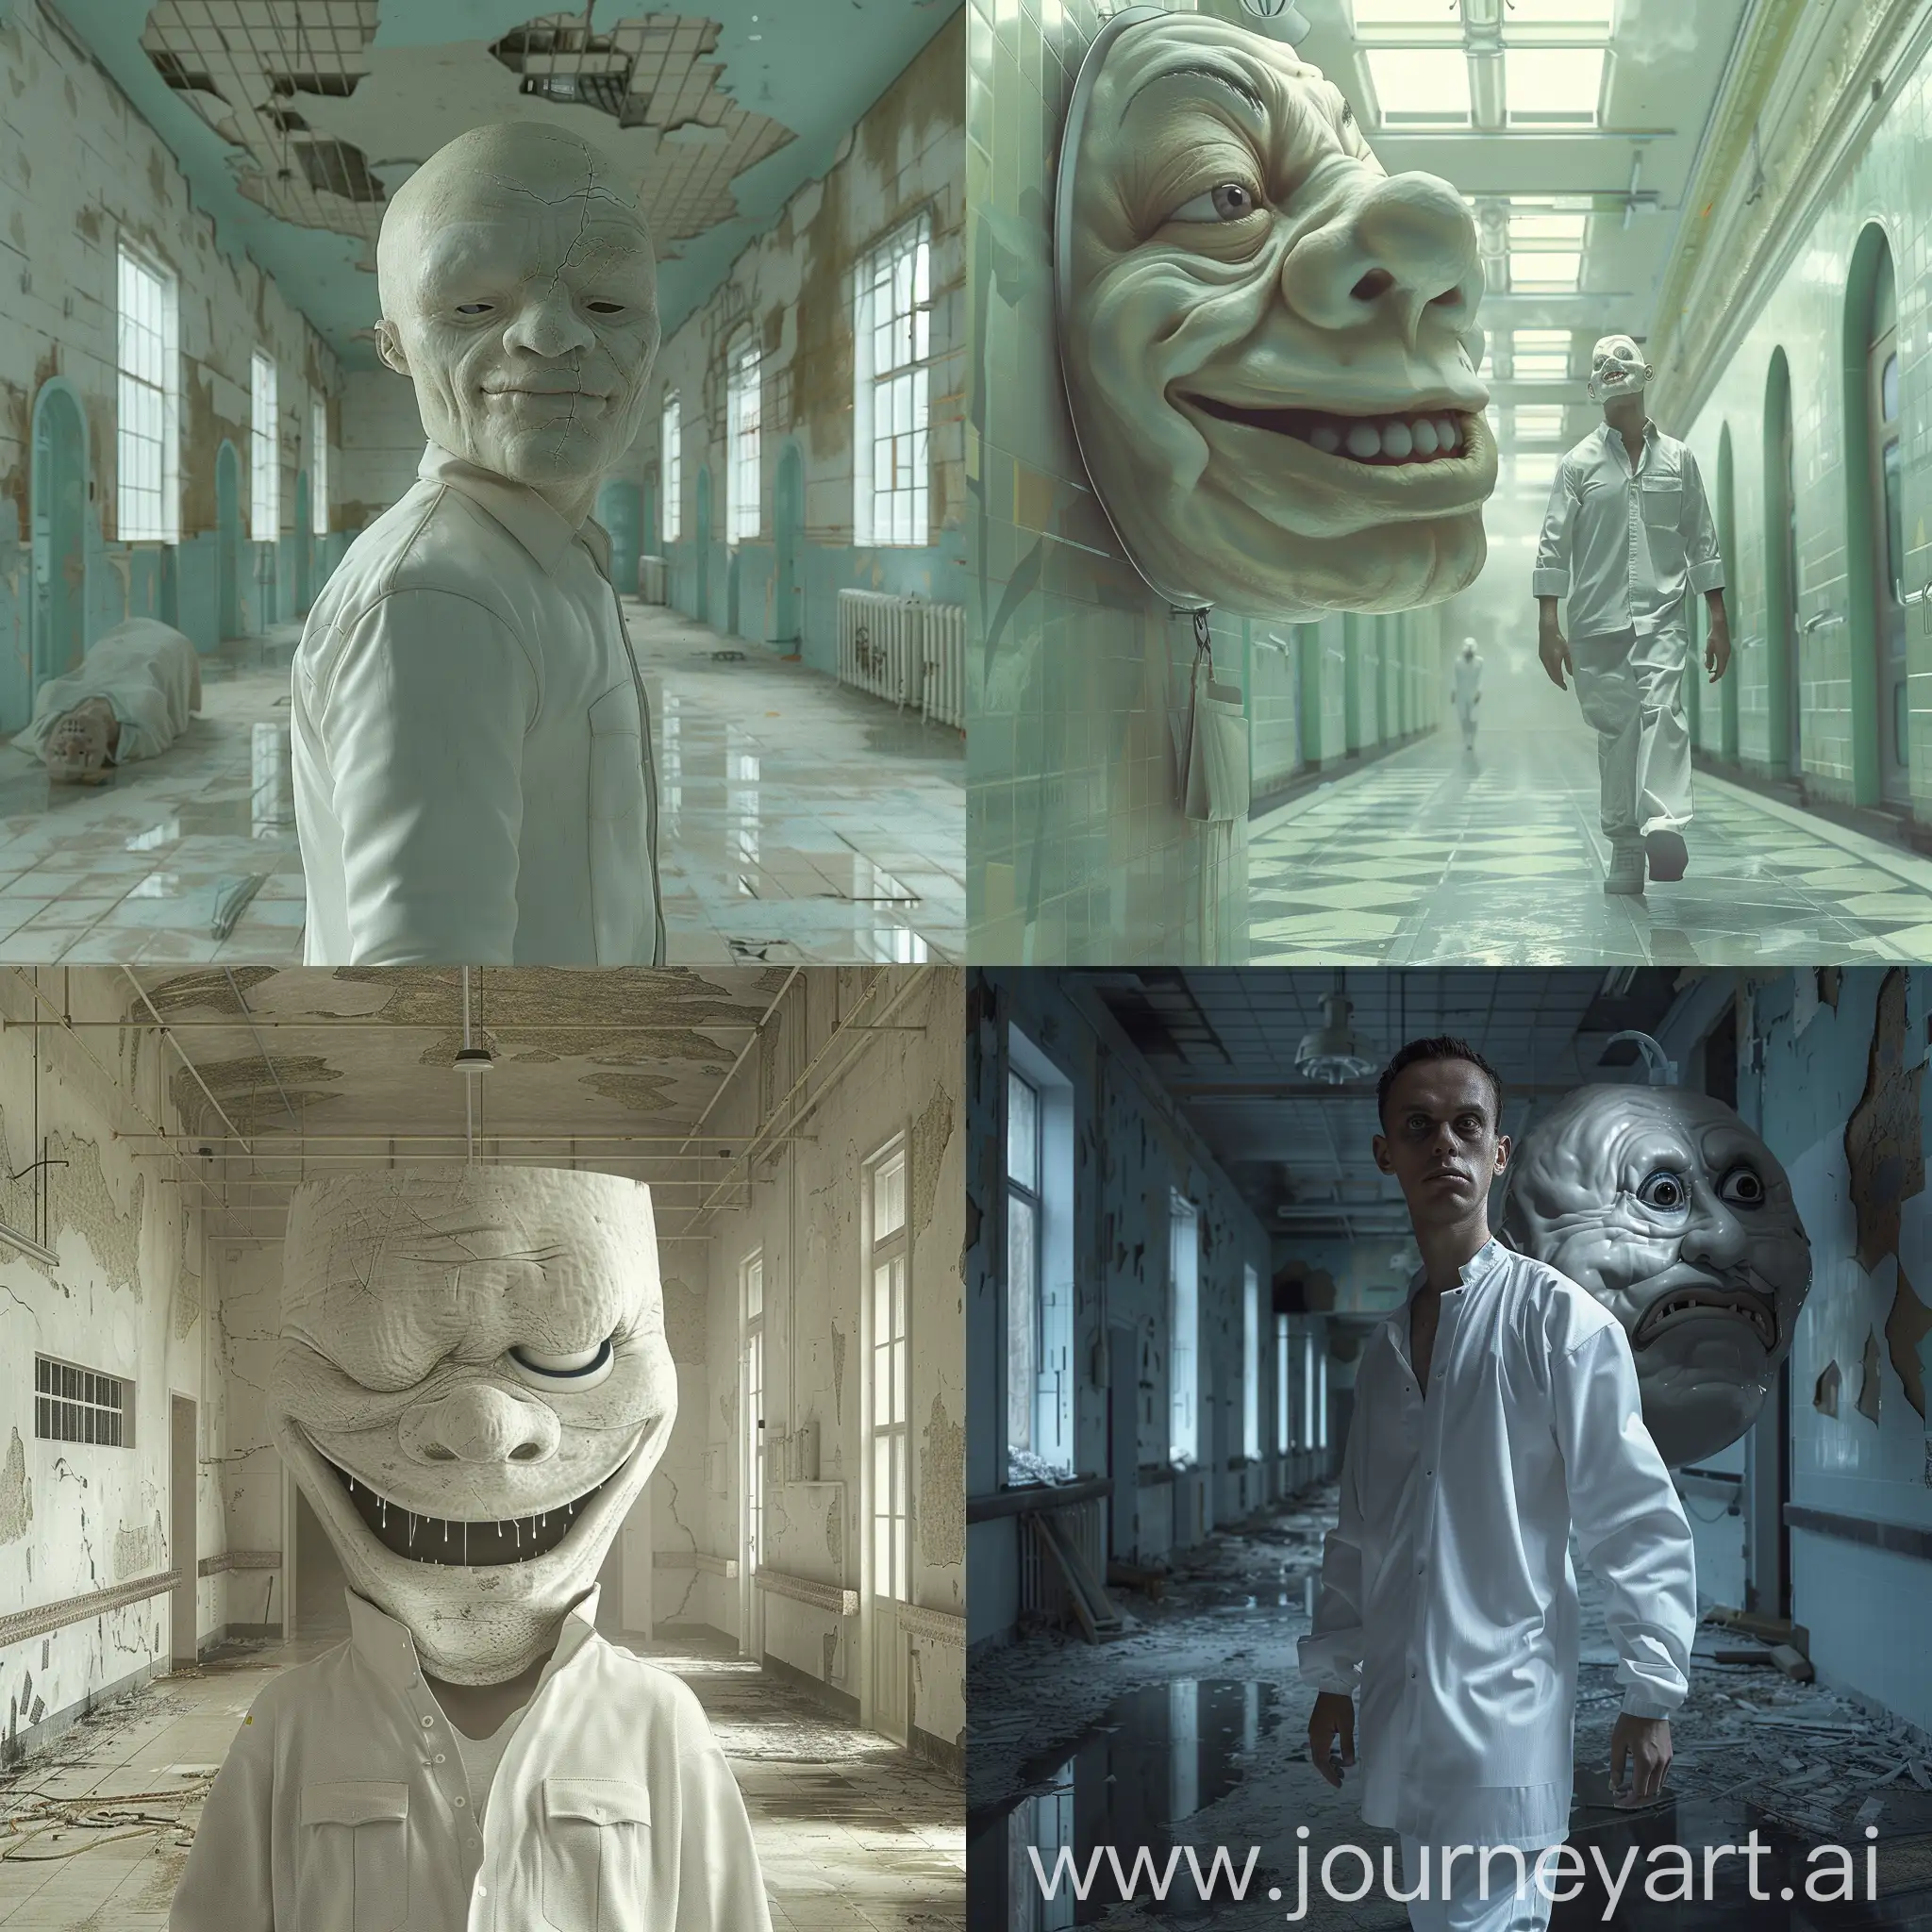 Hyperrealistic-Portrait-of-Man-in-White-Clothes-with-Altered-Face-in-Mental-Hospital-Setting